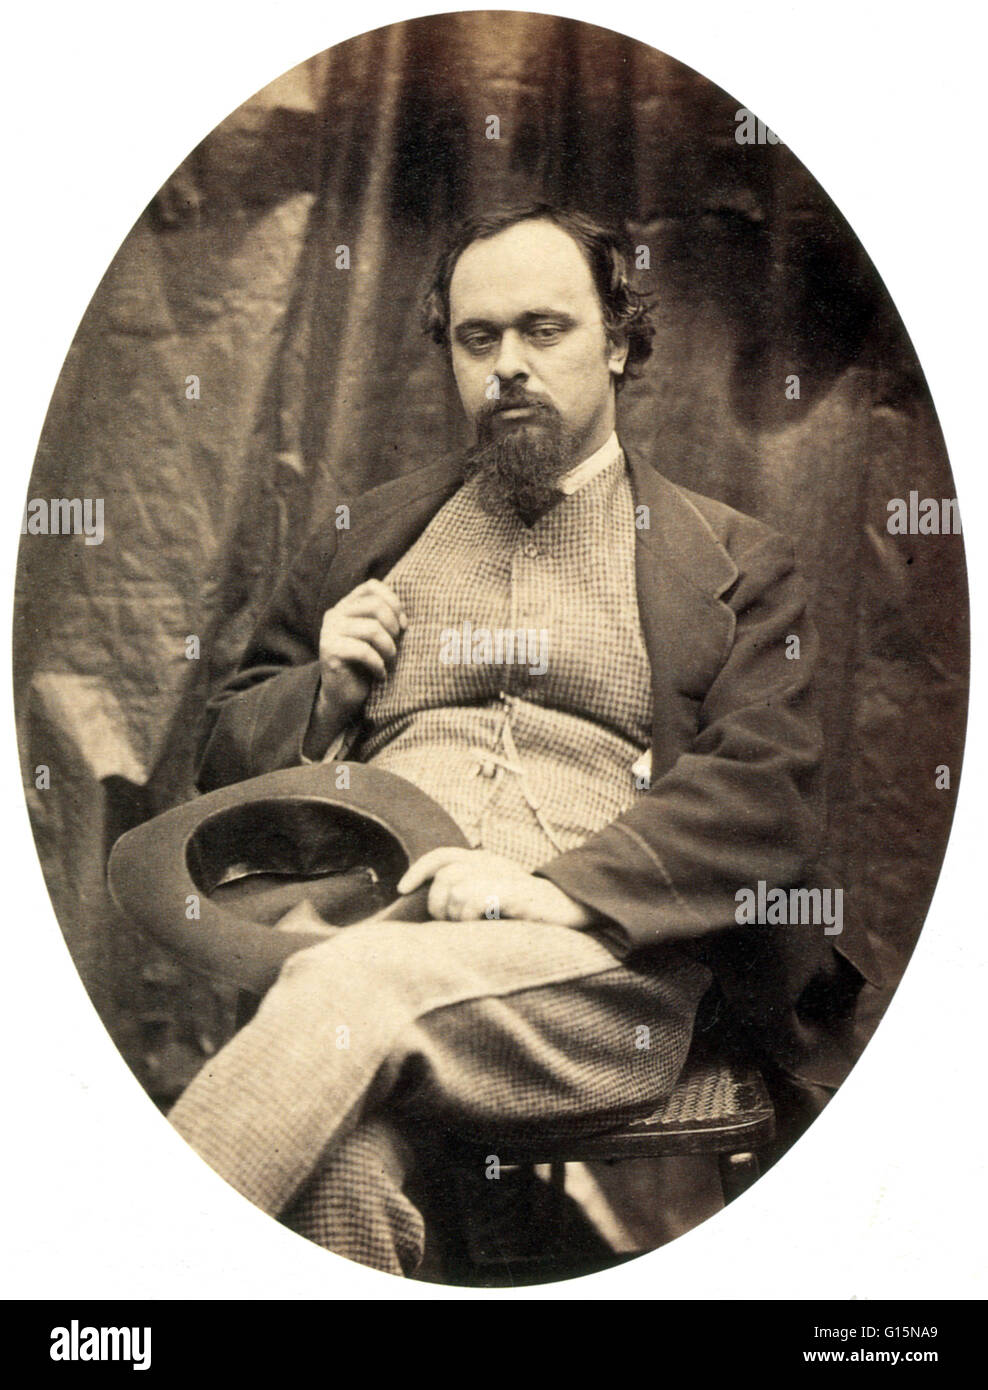 Dante Gabriel Rossetti (May 12, 1828 - April 9, 1882) was an English poet, illustrator, painter and translator. His early poetry was influenced by John Keats. His later poetry was characterized by the complex interlinking of thought and feeling. He freque Stock Photo